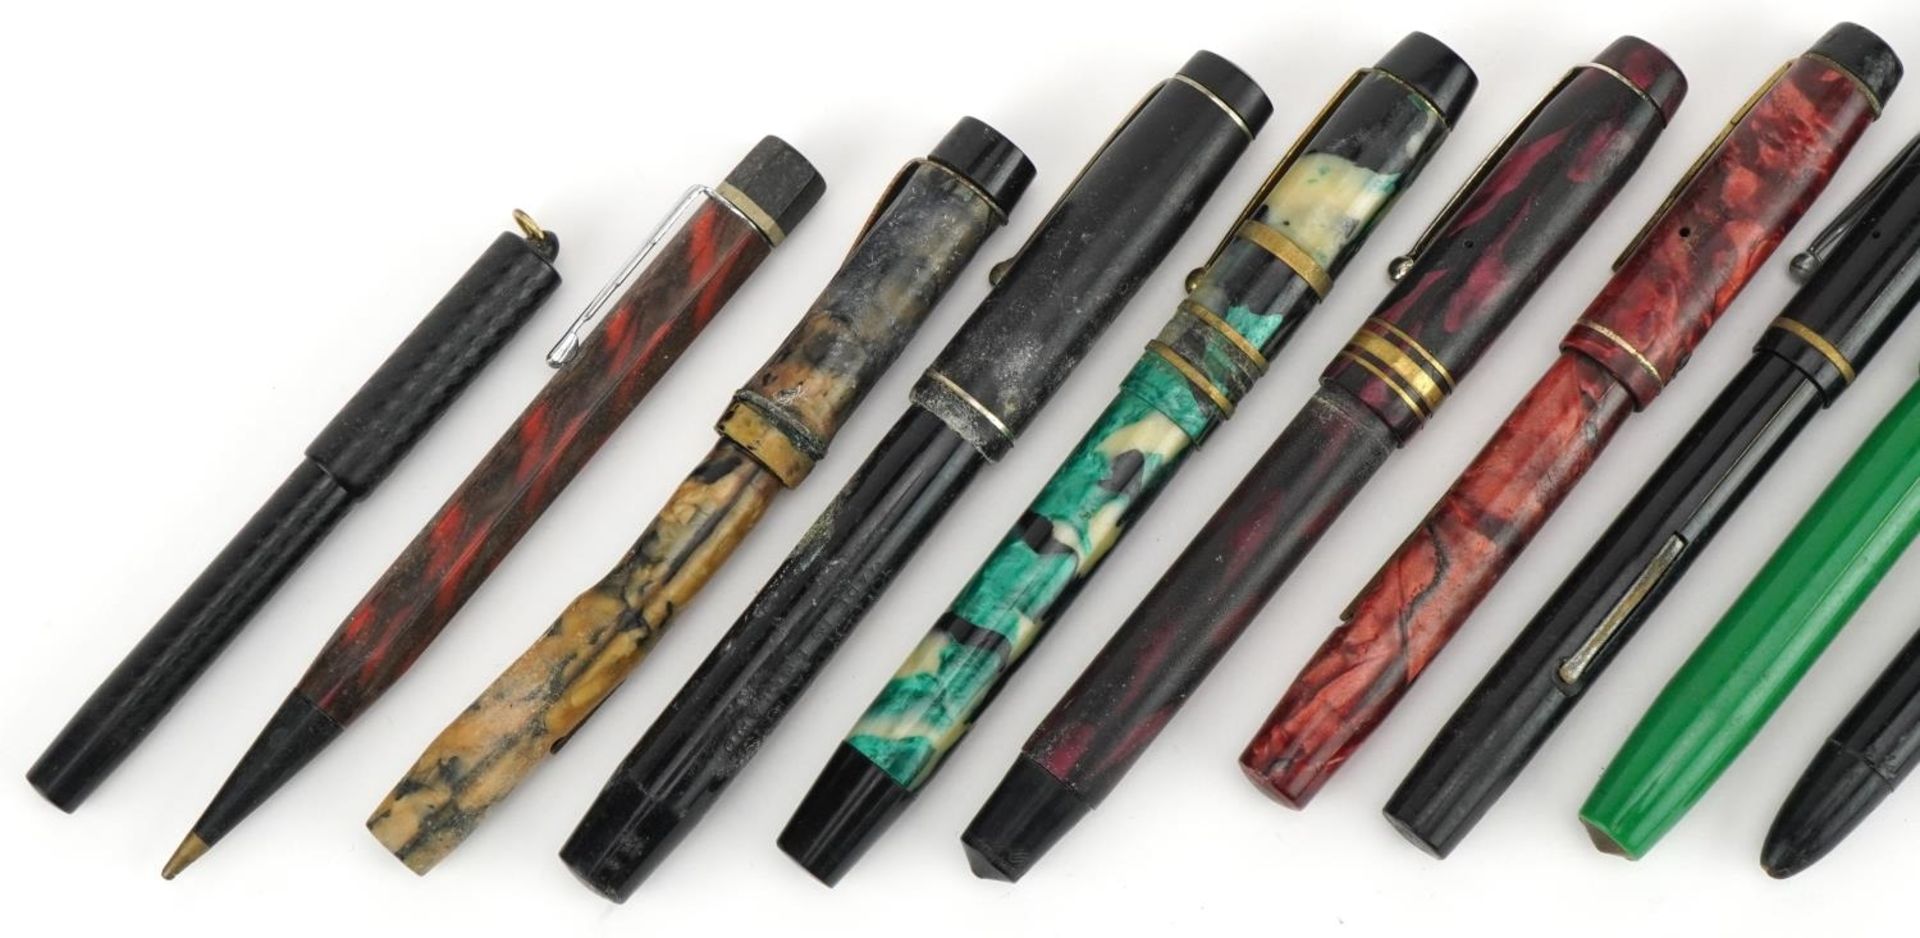 Vintage fountain pens and propelling pencils, some marbleised, including Golden Guinea and - Image 2 of 4